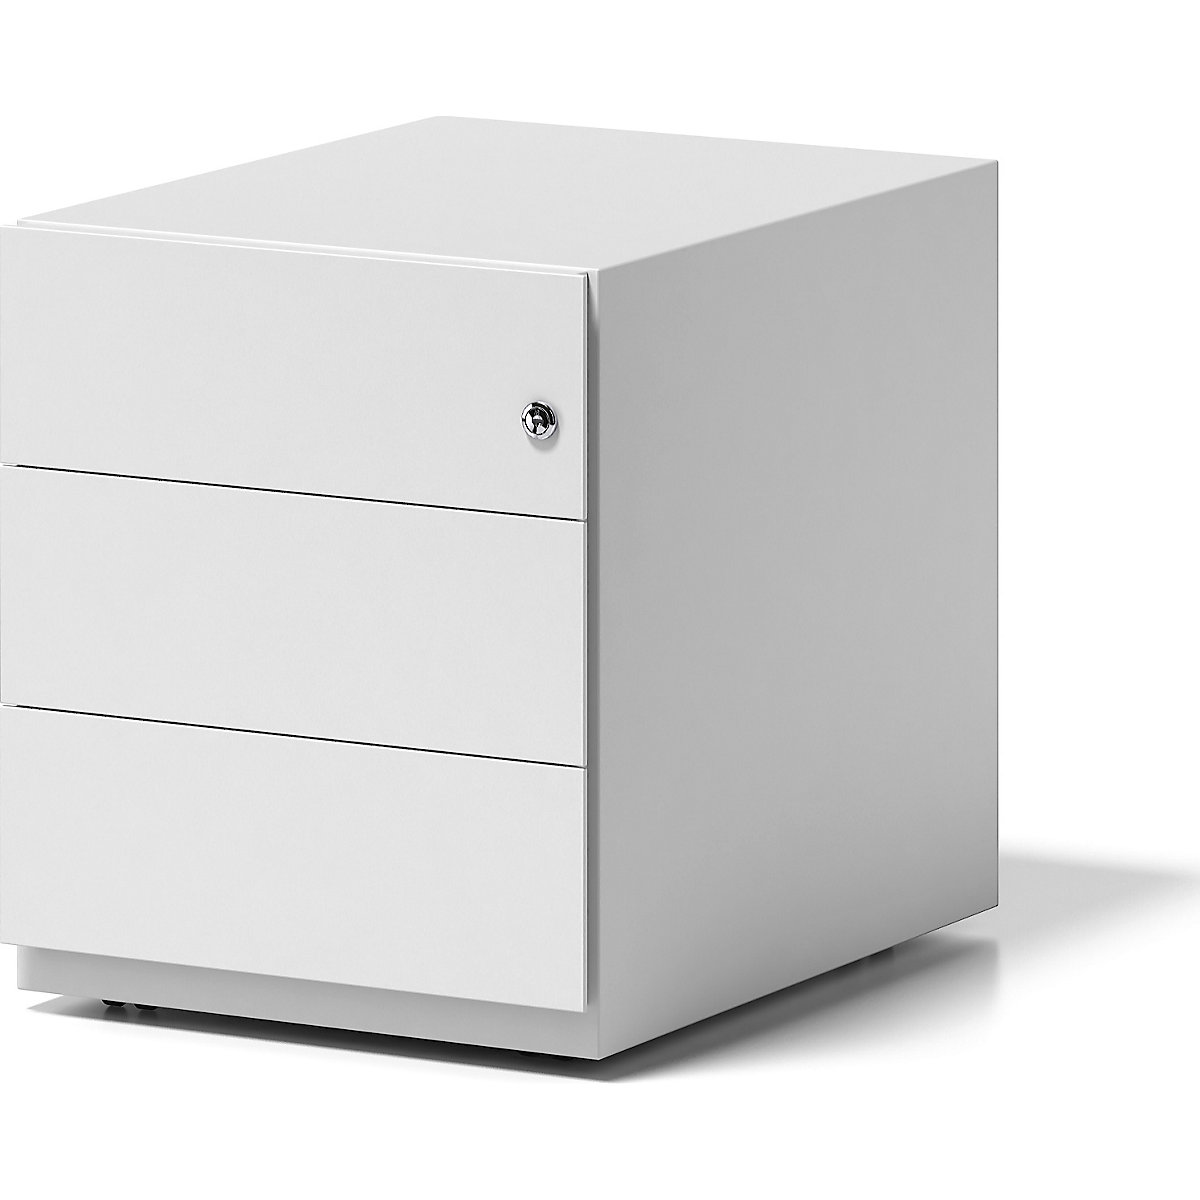 Note™ mobile drawer unit, with 3 universal drawers - BISLEY